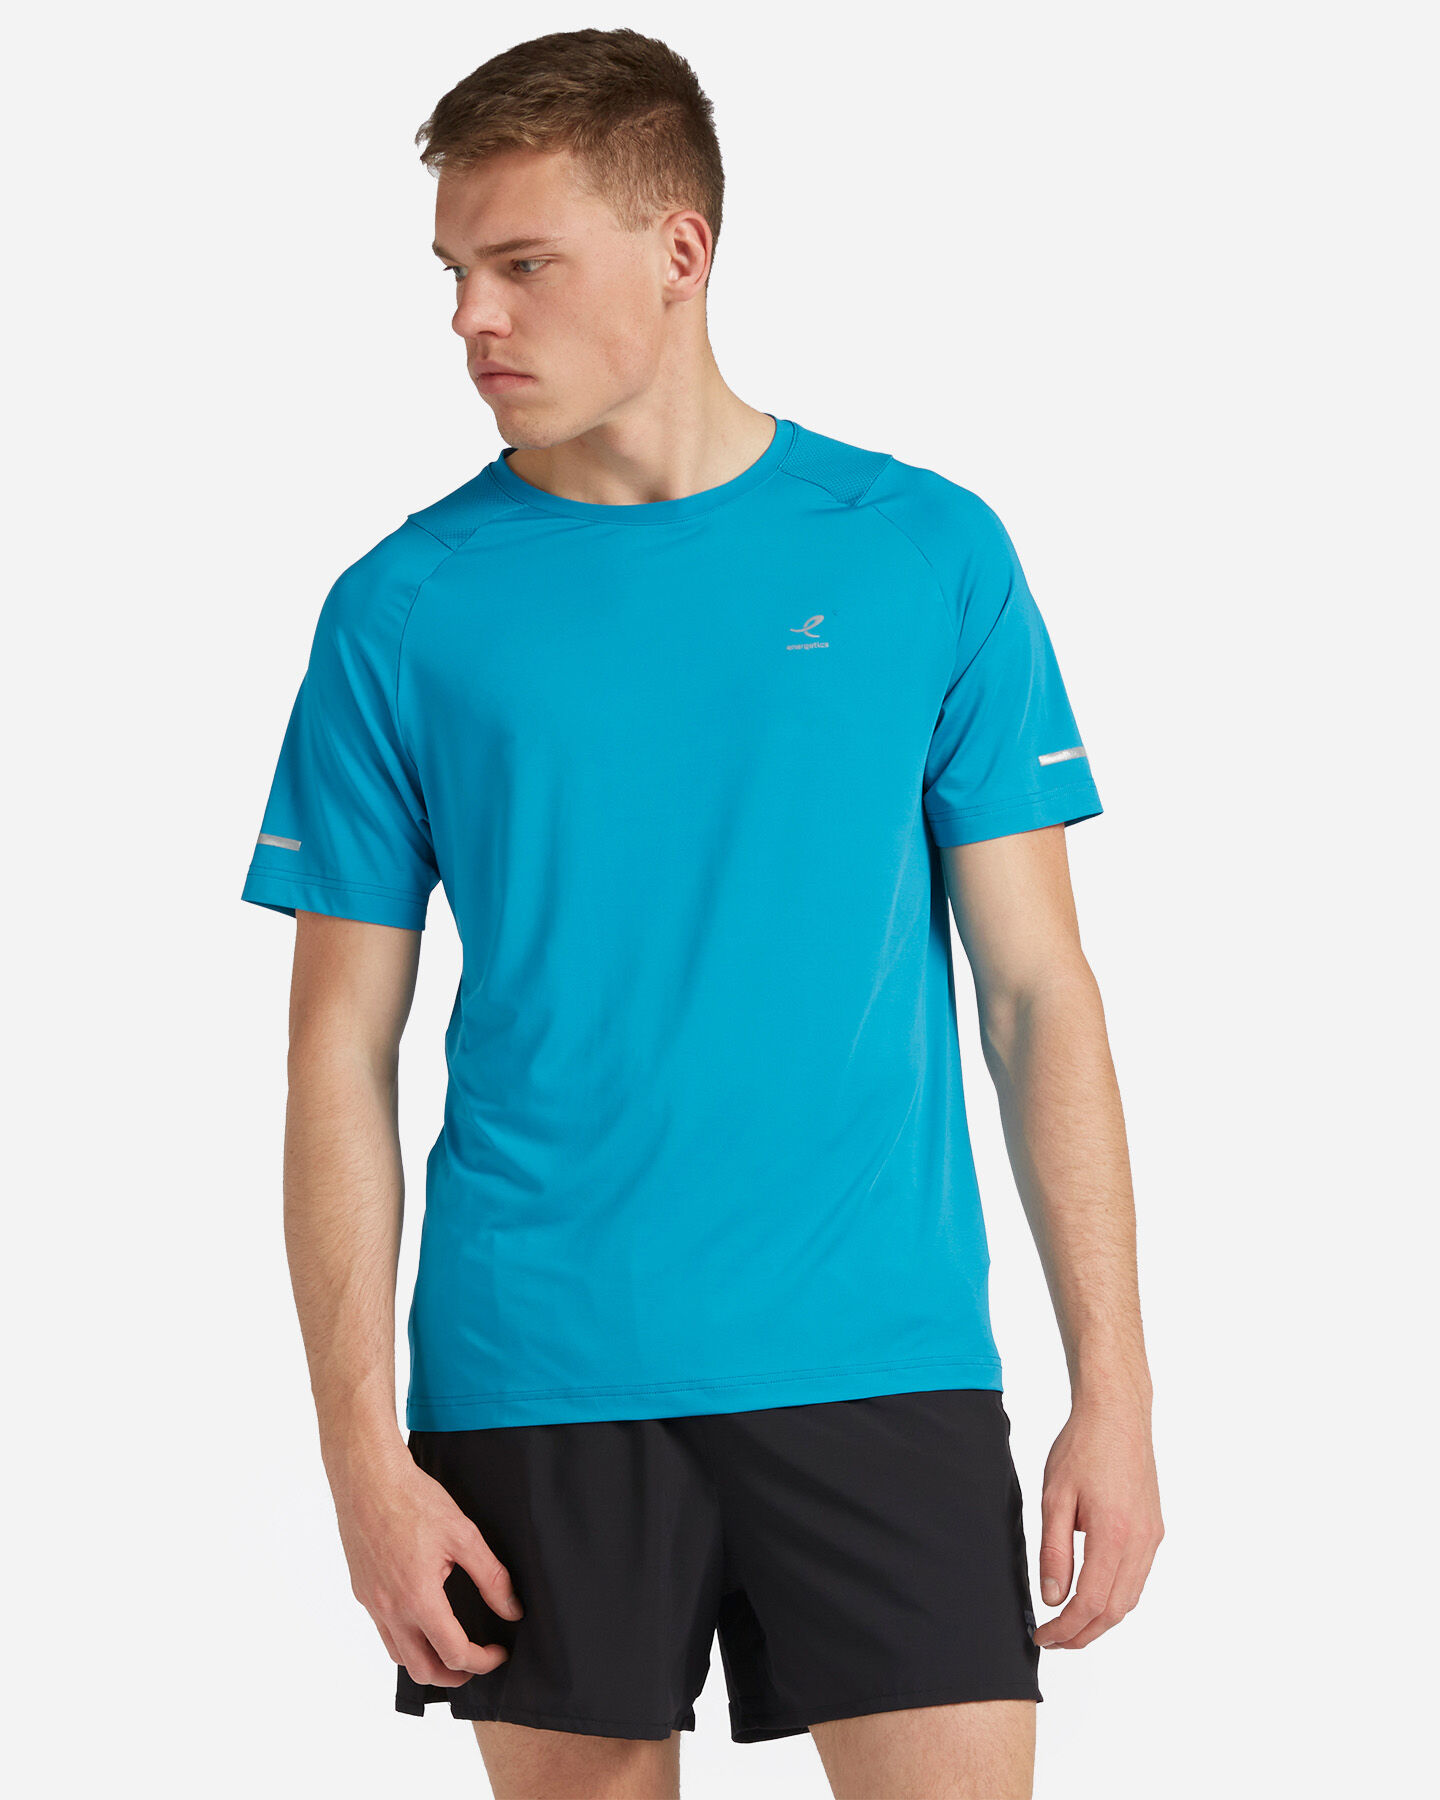  T-Shirt running ENERGETICS MUST HAVE M S5510772|612|L scatto 0